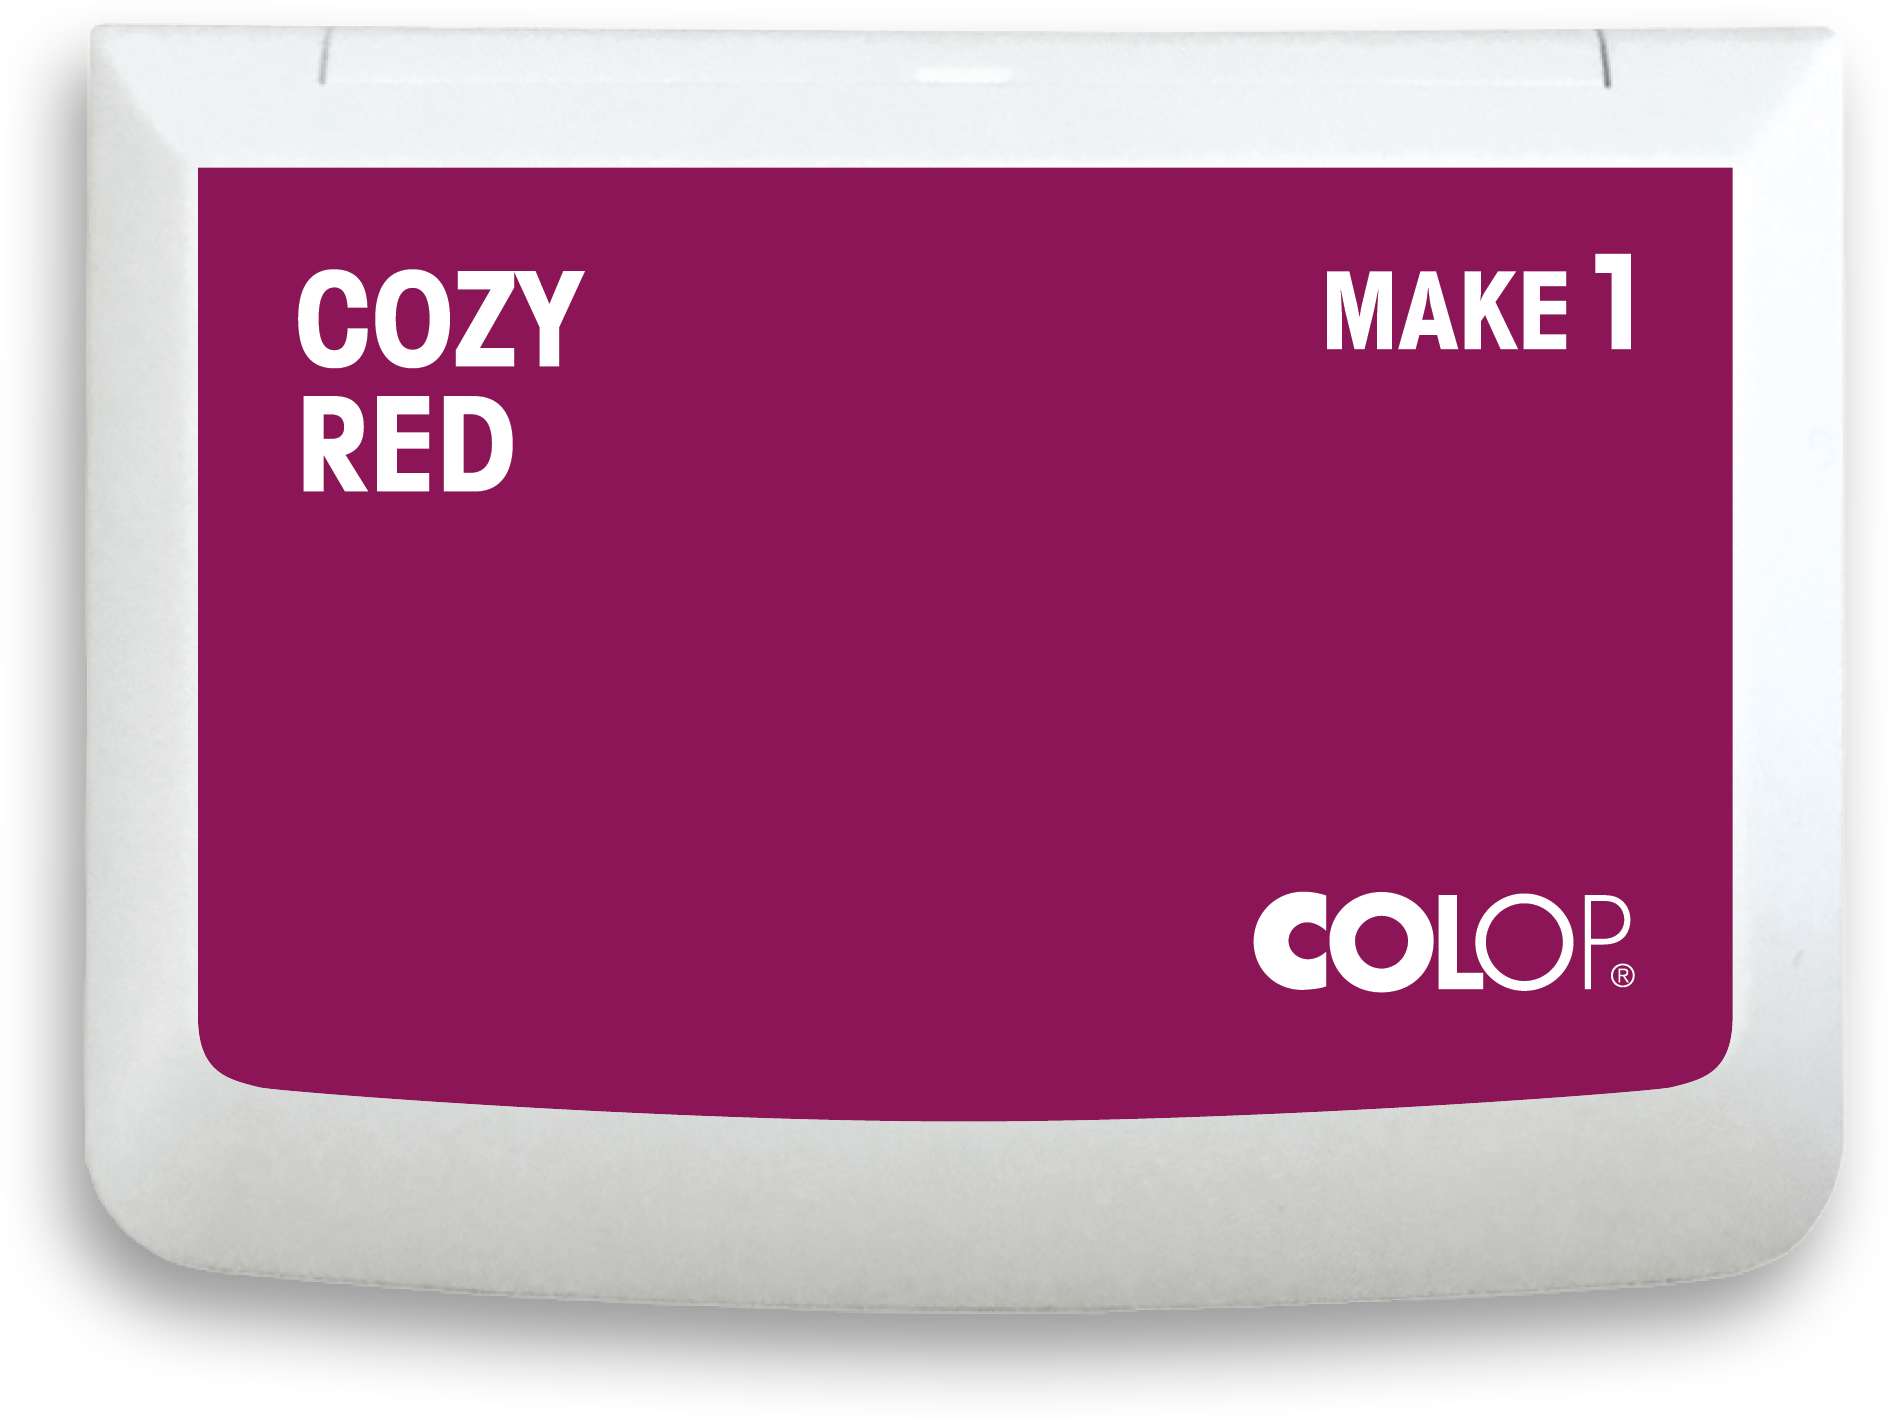 COLOP Stempelkissen 155114 MAKE1 cozy red